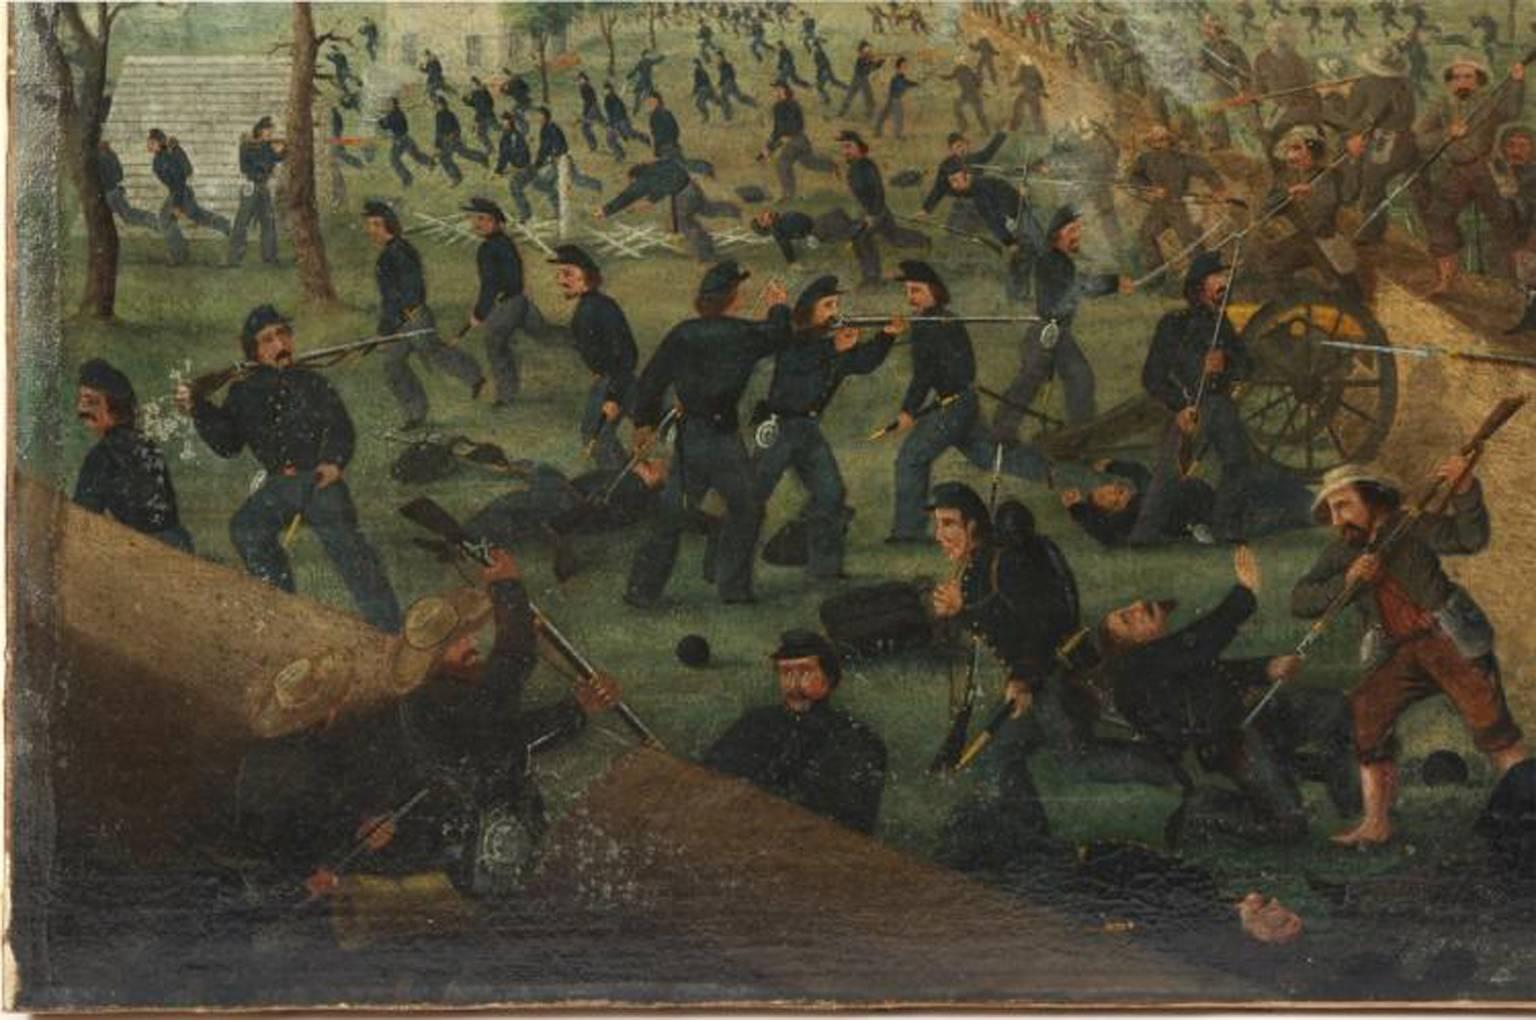 Amazing Civil War Oil Painting attributed to important Civil War Artist Edward Arnold (Louisiana, 1822 – 1866)  Painted During the Civil War  Oil on Canvas  Depicts a Civil War Battle Scene  Signed and dated in the lower left quadrant by the artist 